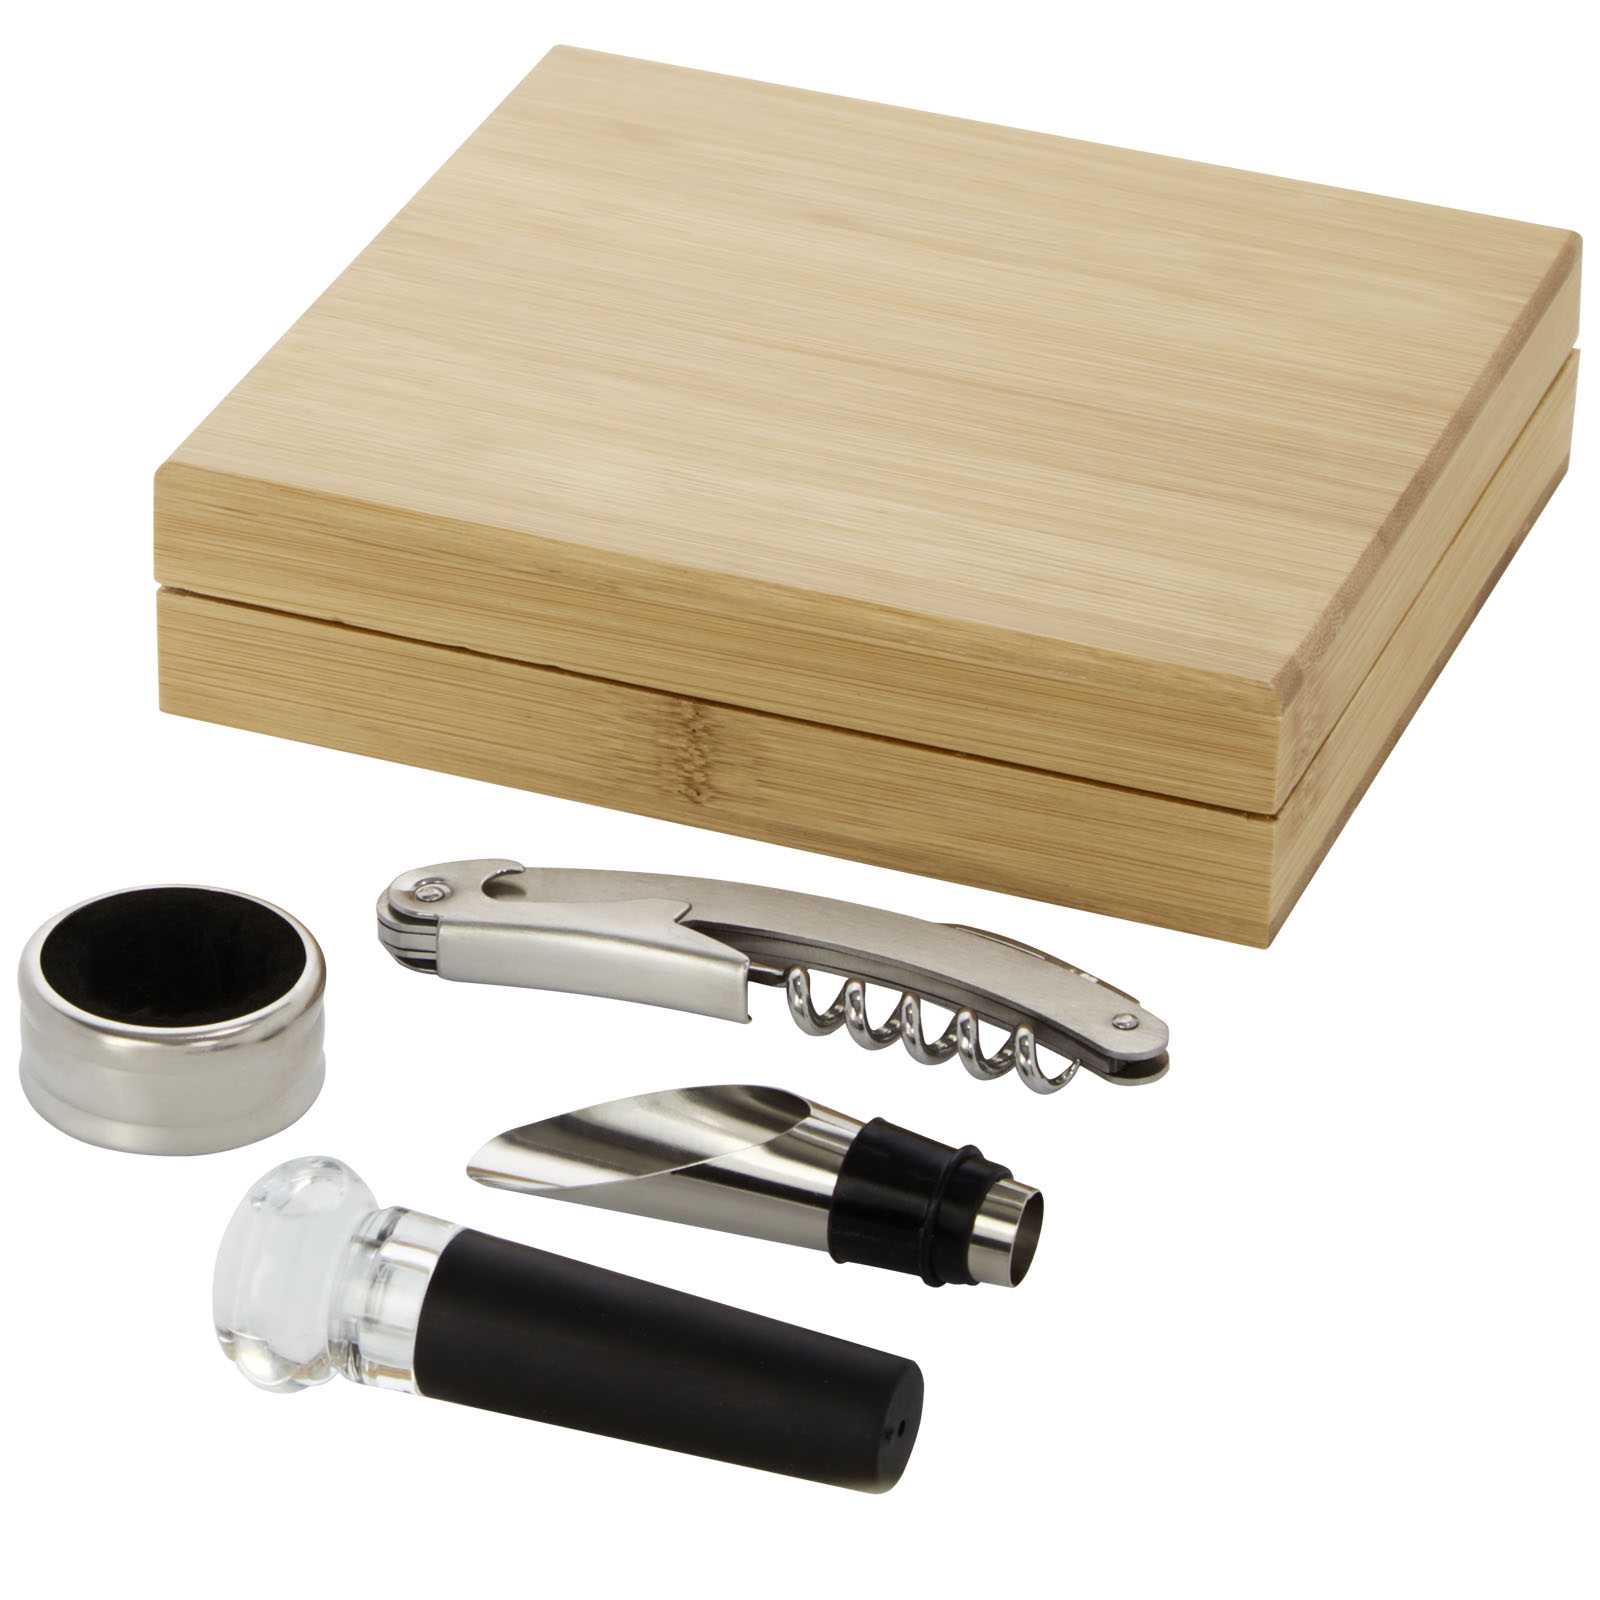 Sustainable Bamboo 4-piece Wine Set - Kingston upon Thames